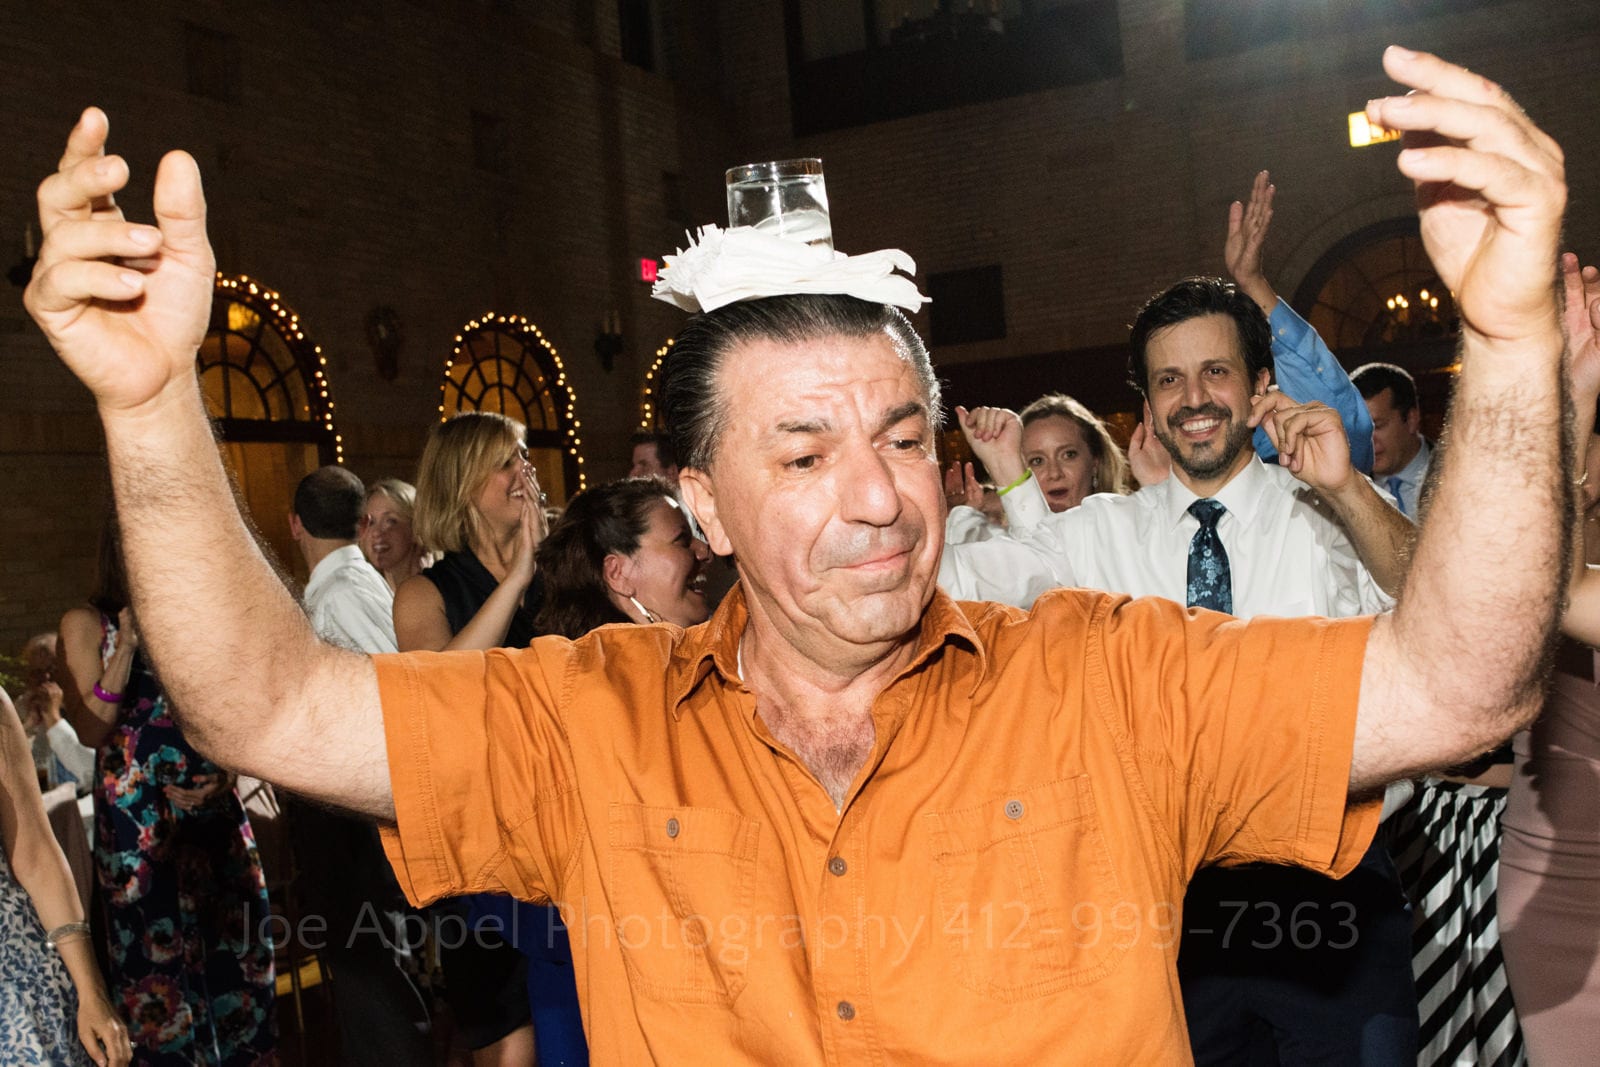 A older man in an orange shirt dances with a glass of water on his head during a St Francis Hall Washington DC wedding.